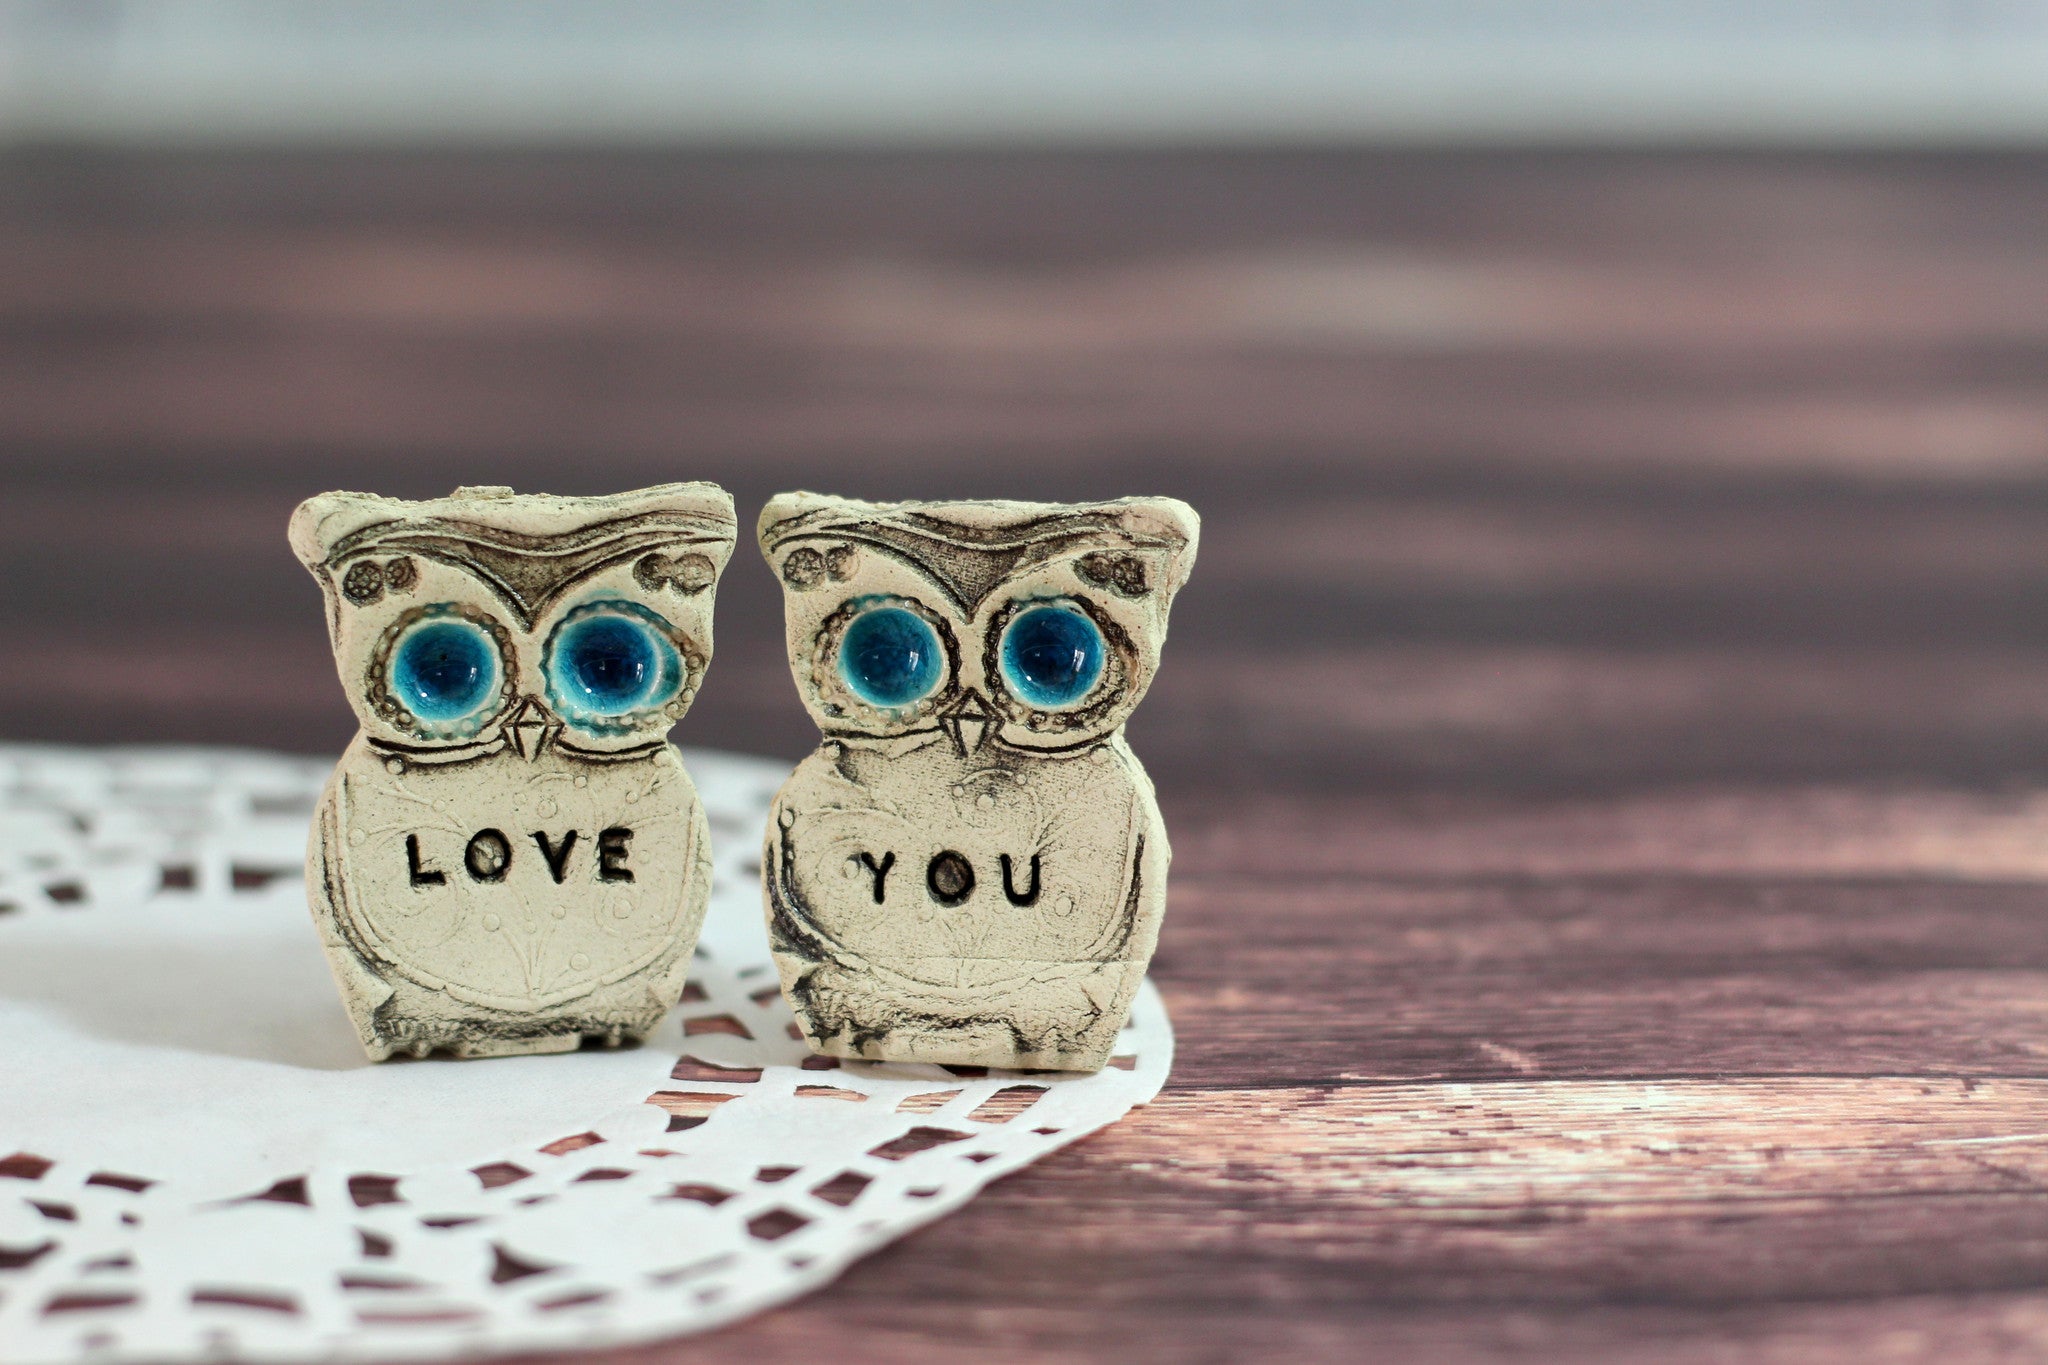 Love you owls - Ceramics By Orly
 - 1